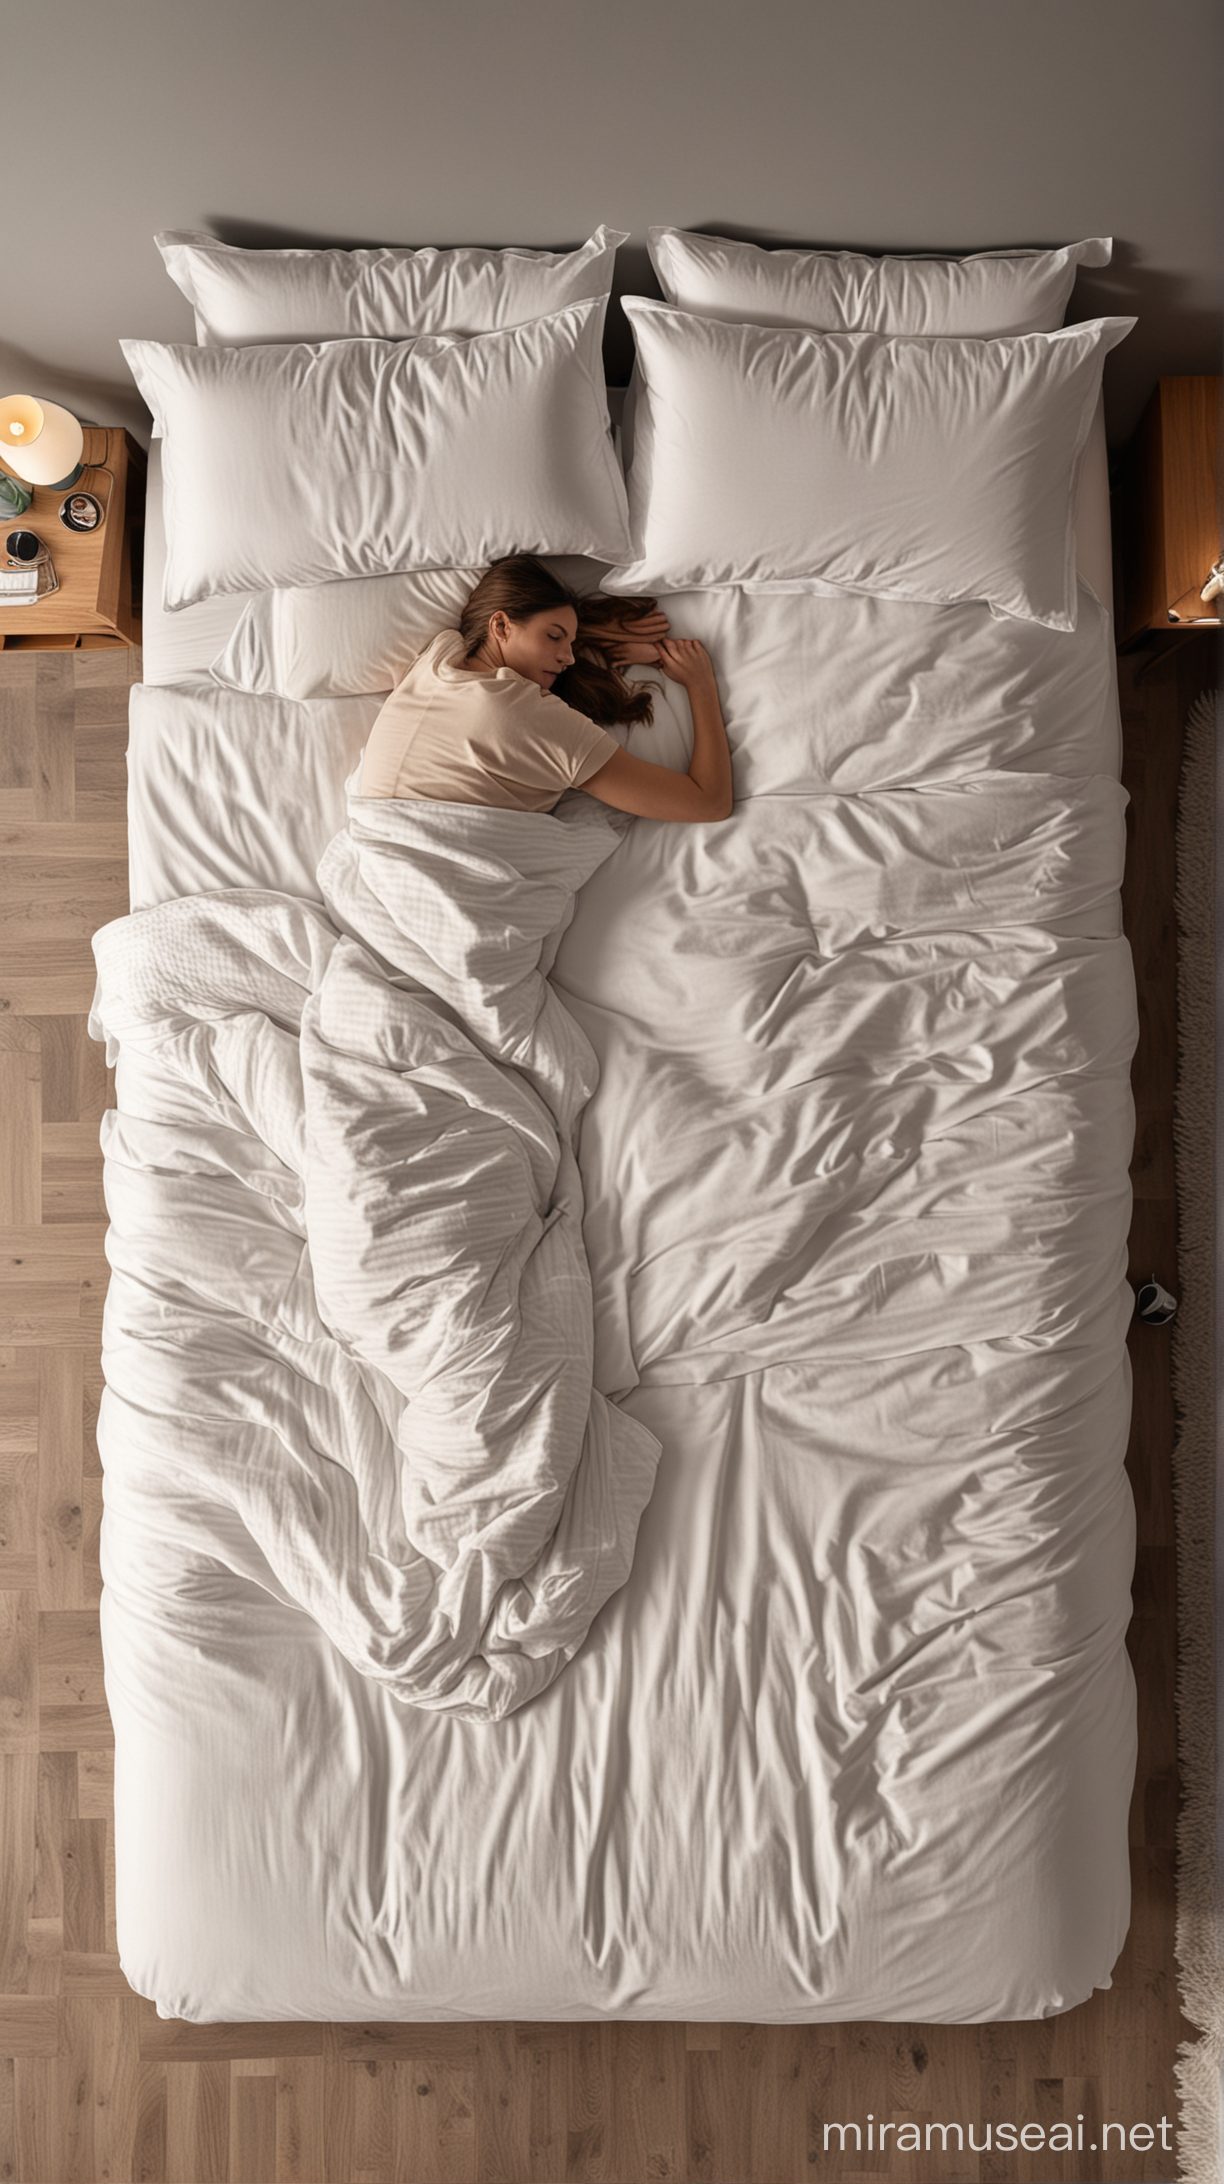 person sleeping on extreme  side of a  double bed , in a cosy room , top view